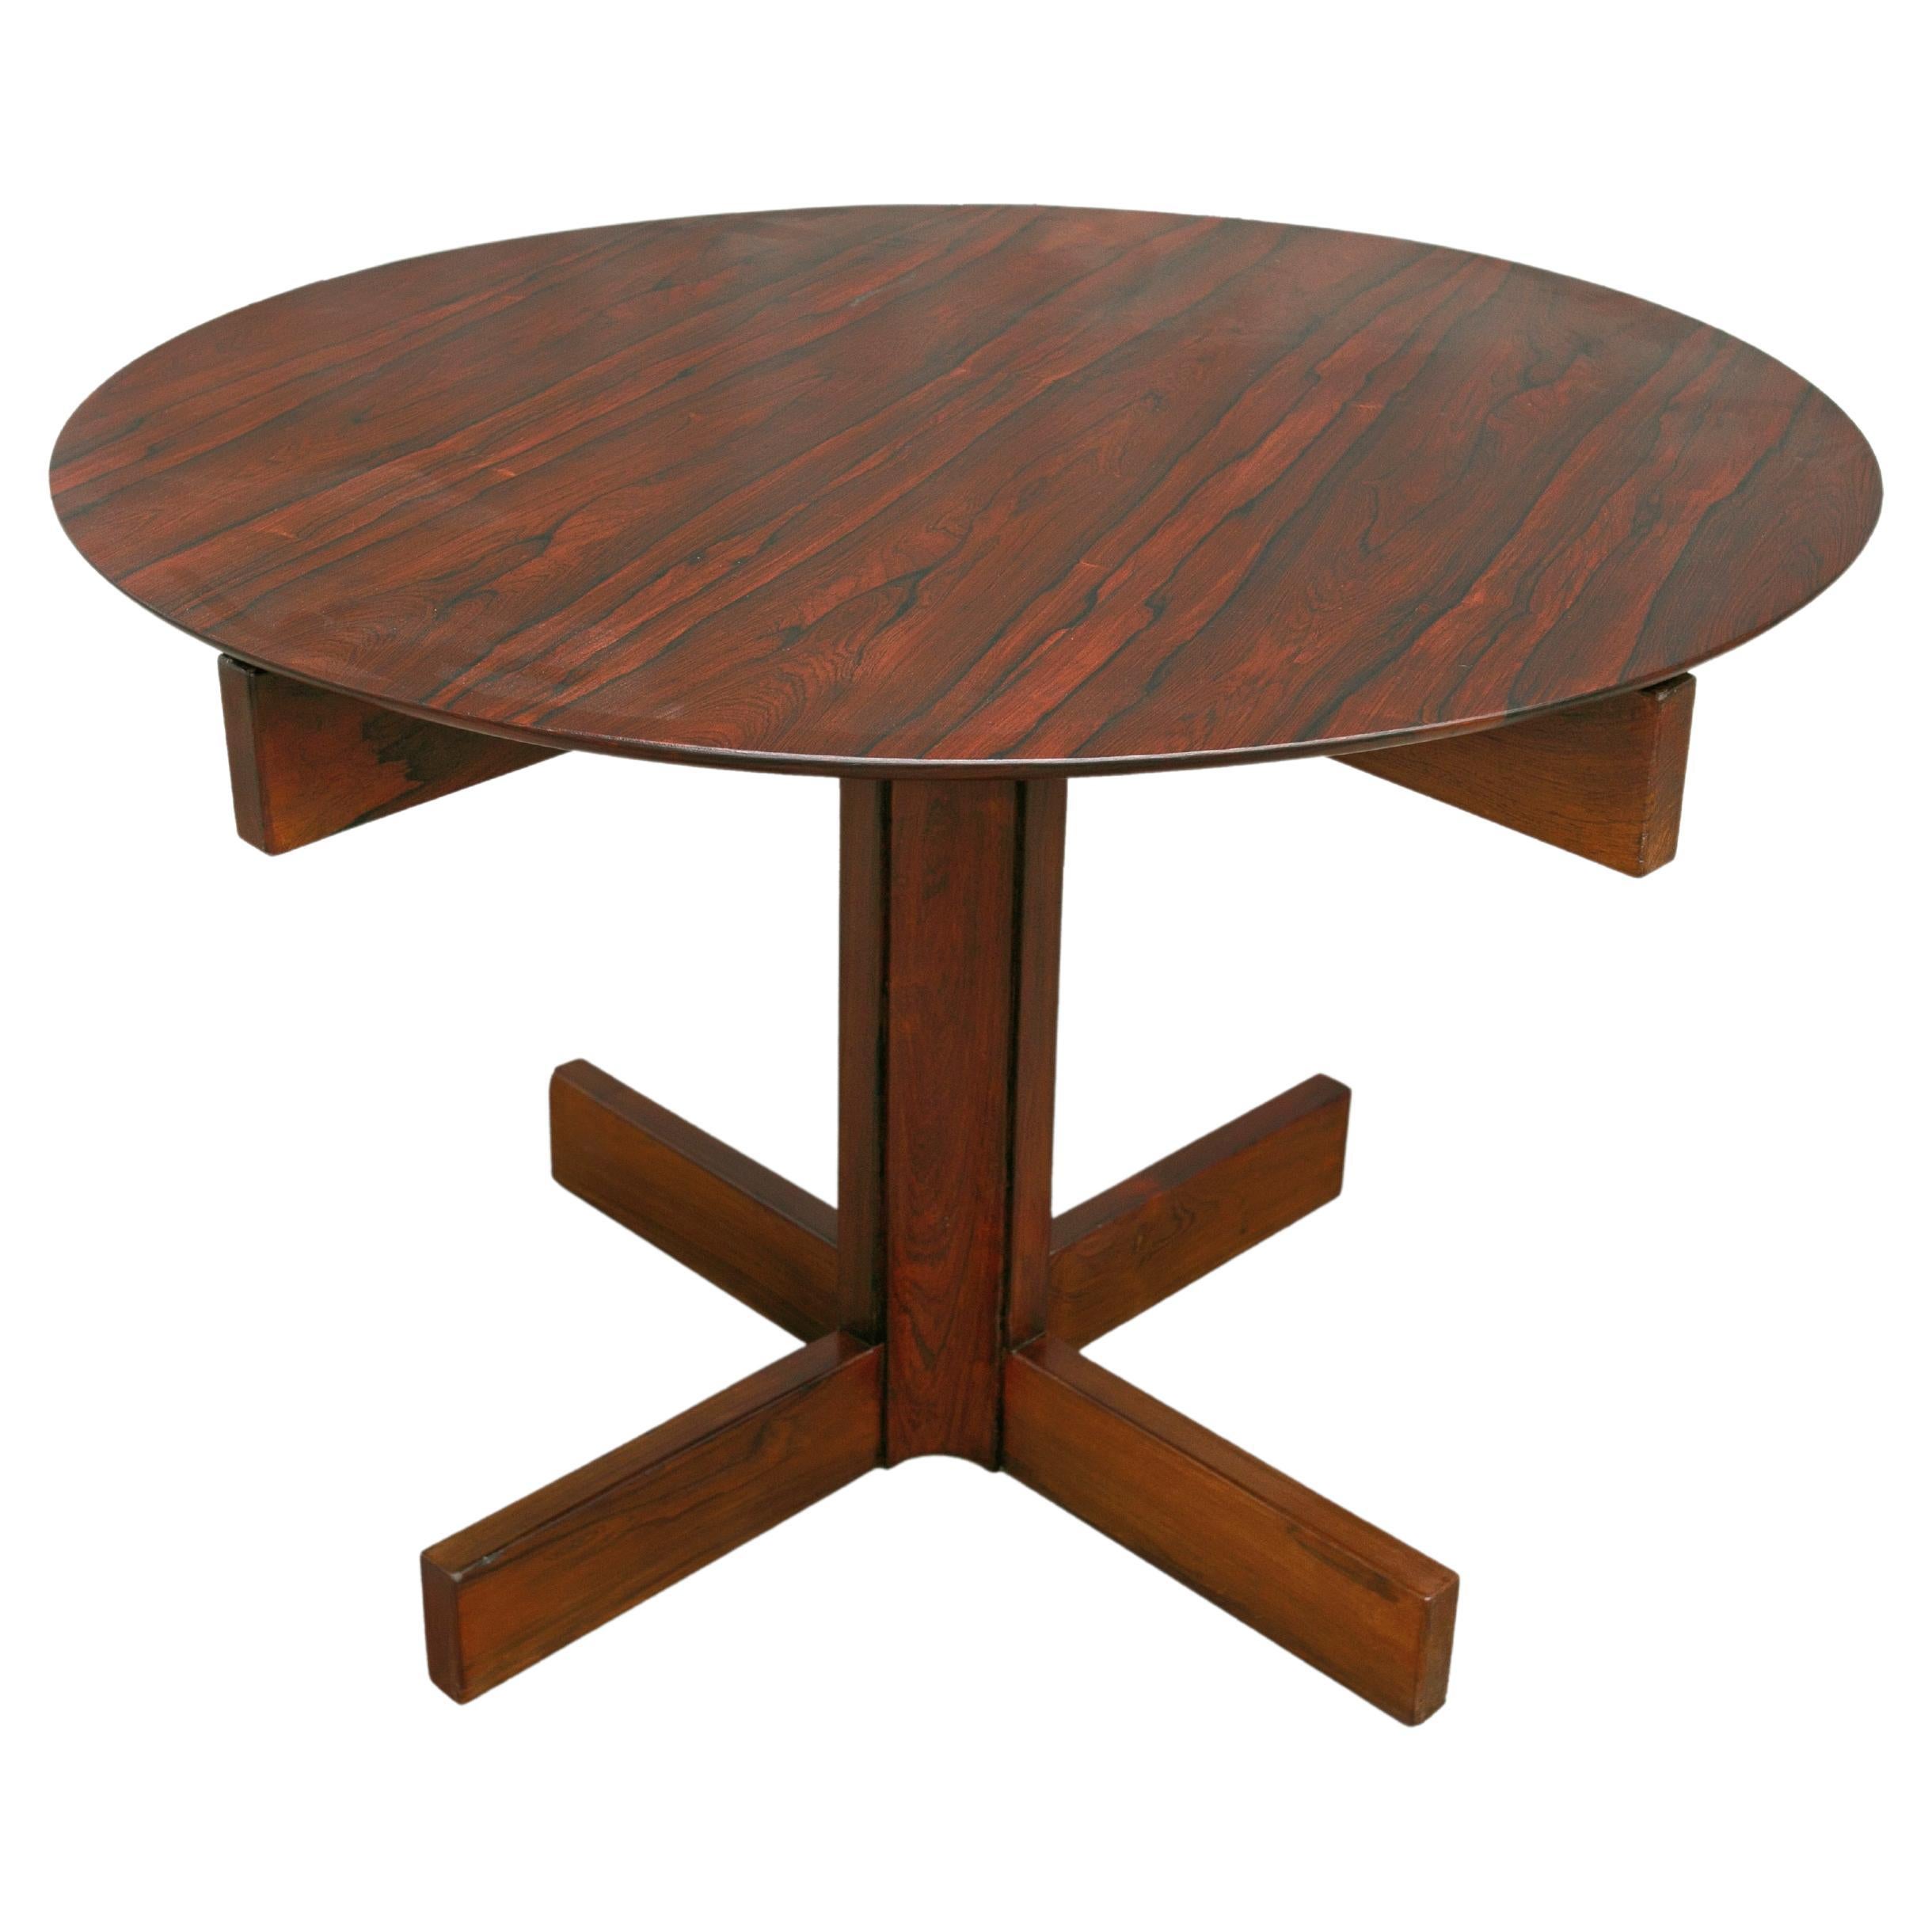 Mid-Century Modern Dining Table in Hardwood by Sergio Rodrigues, 1960, Brazil For Sale